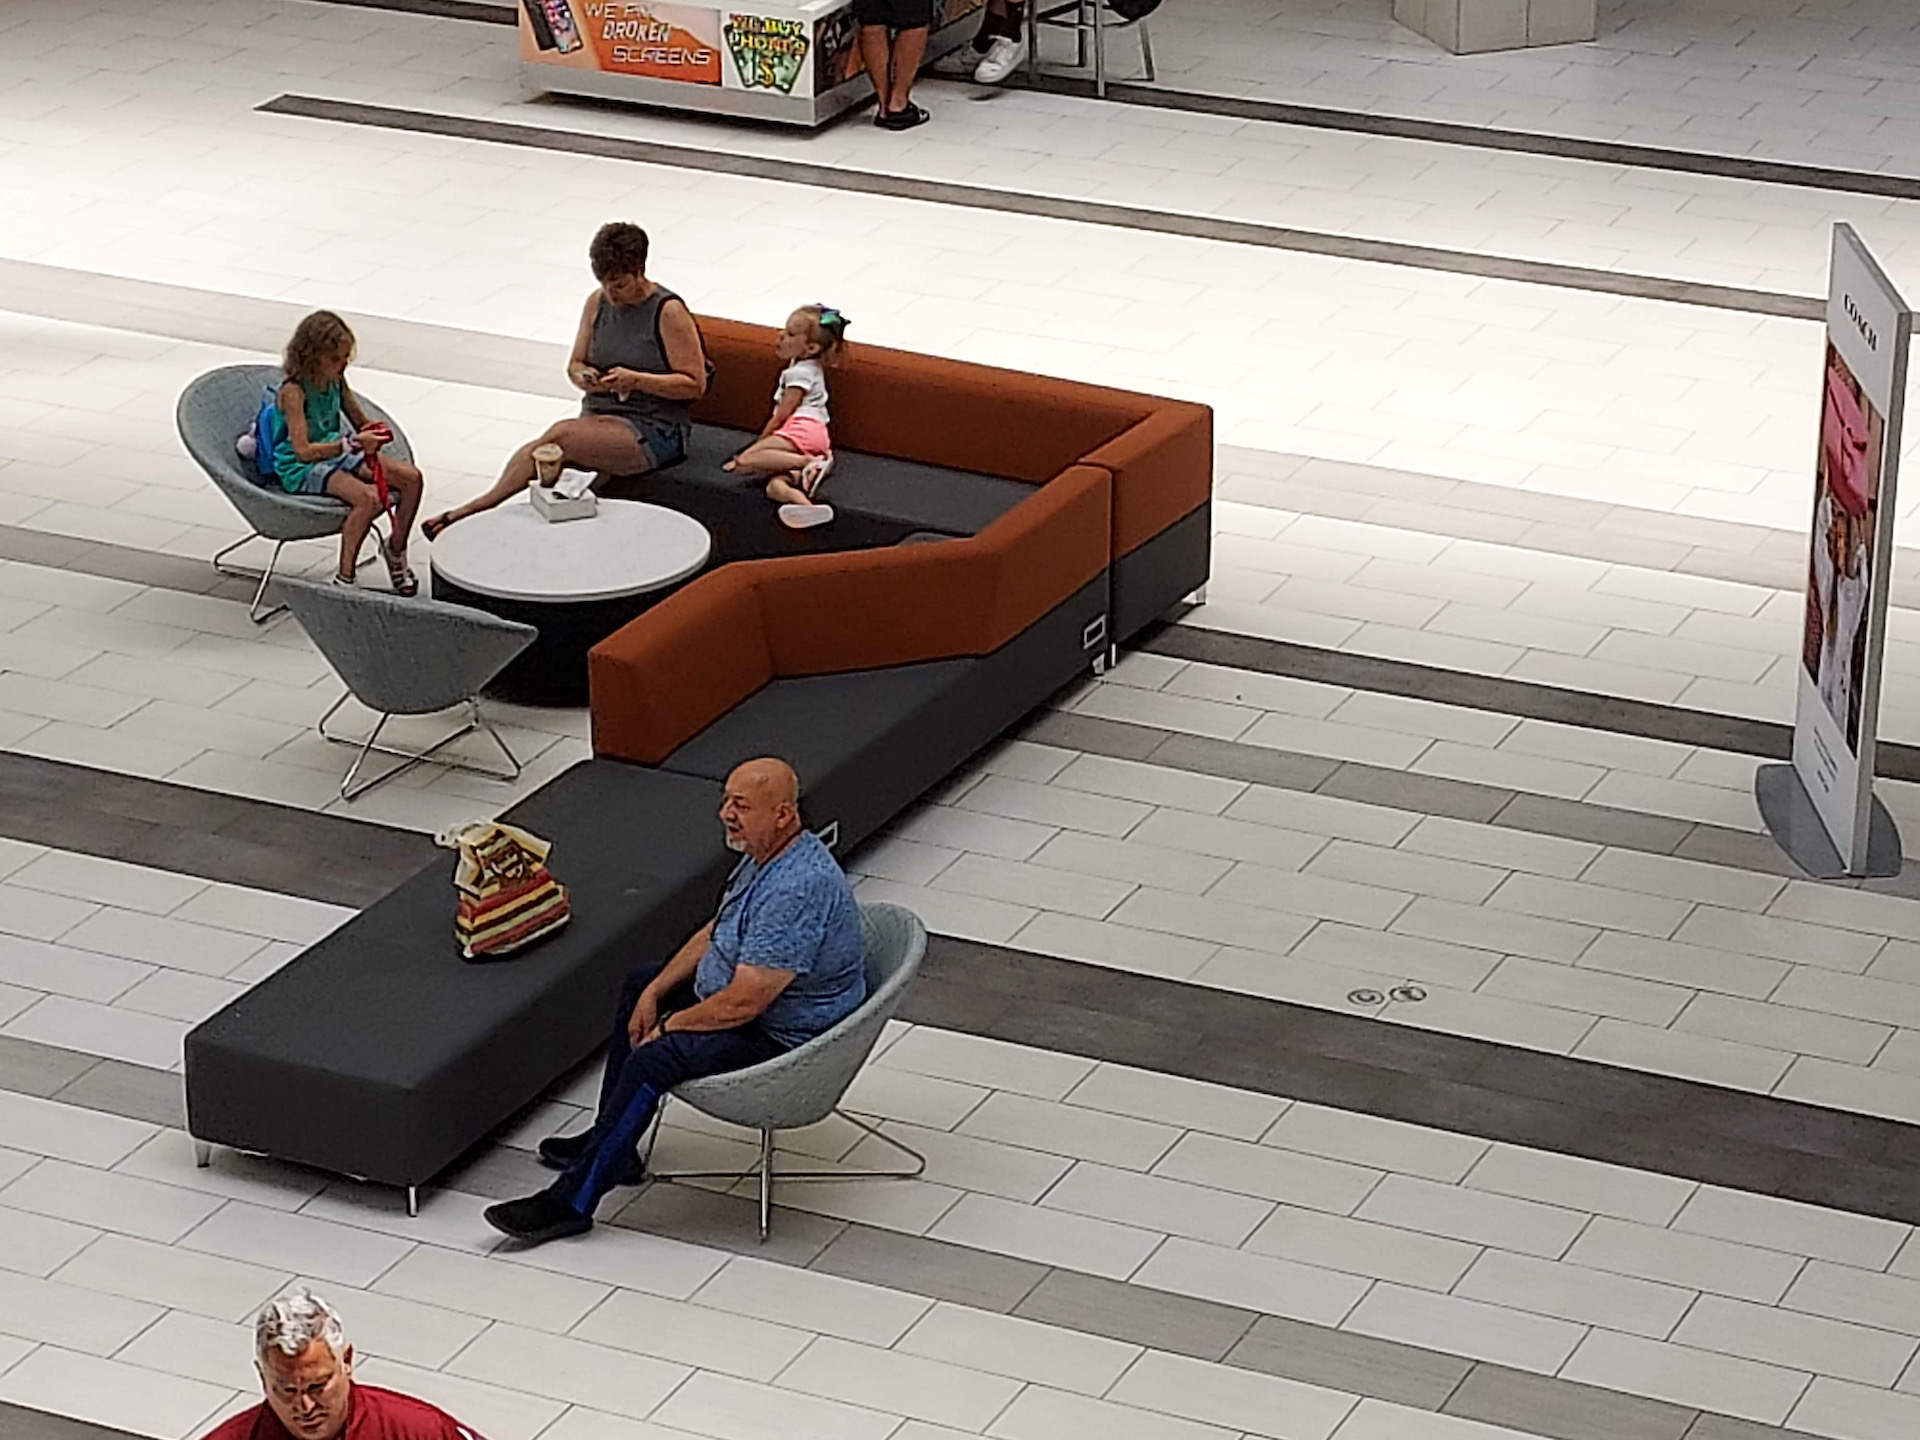 Samsung Galaxy A42 photo sample 4x showing the interior view of a mall with people sitting down around a table